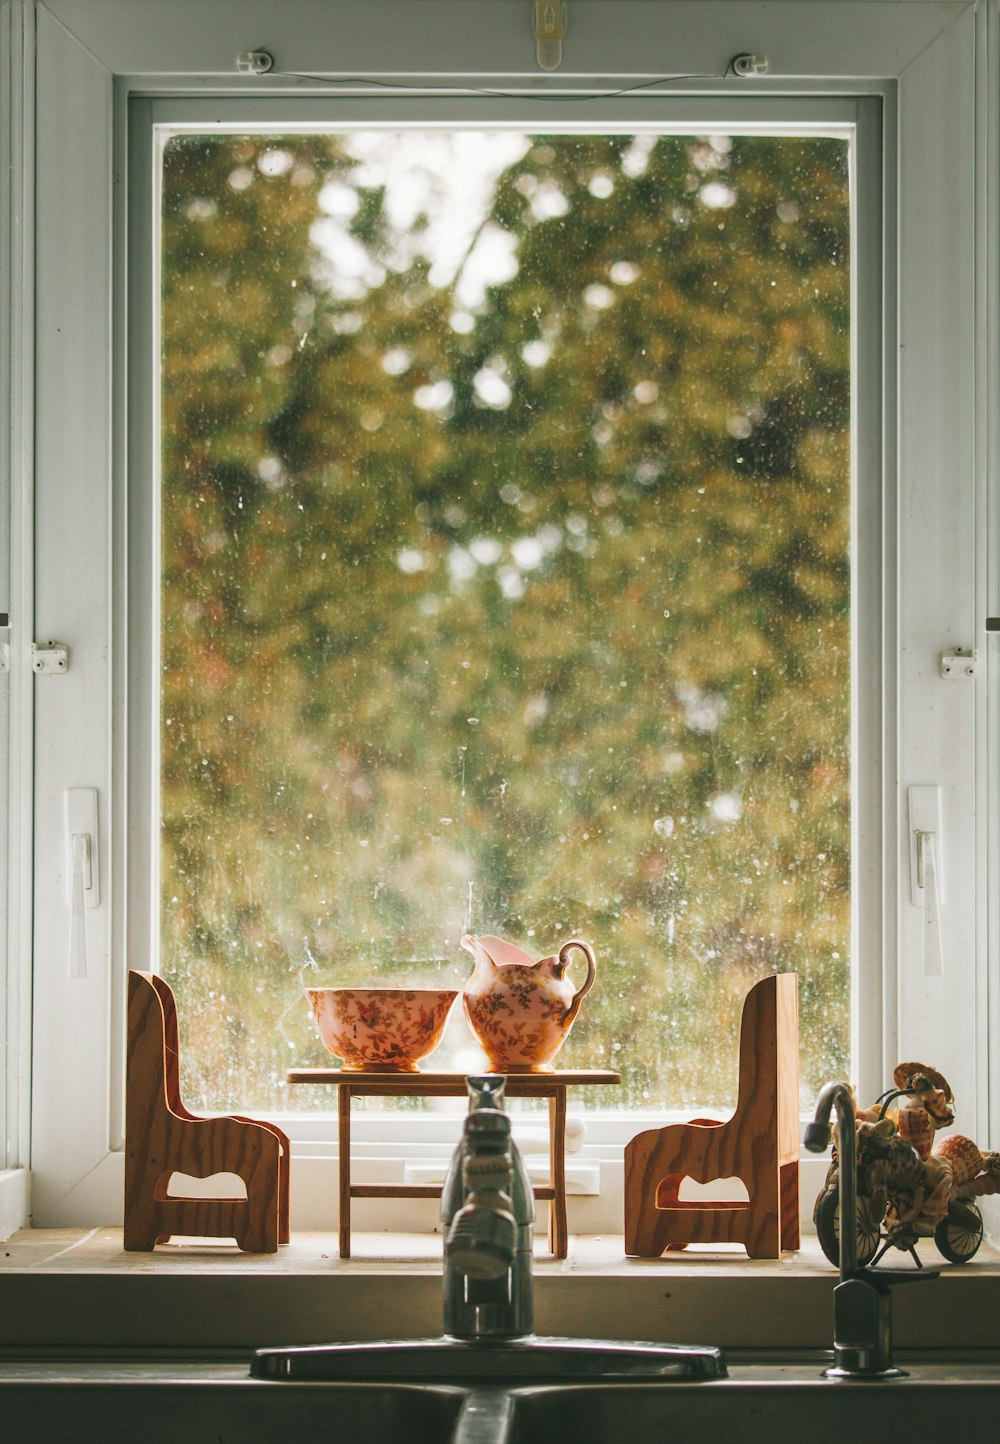 miniature chairs and table near window